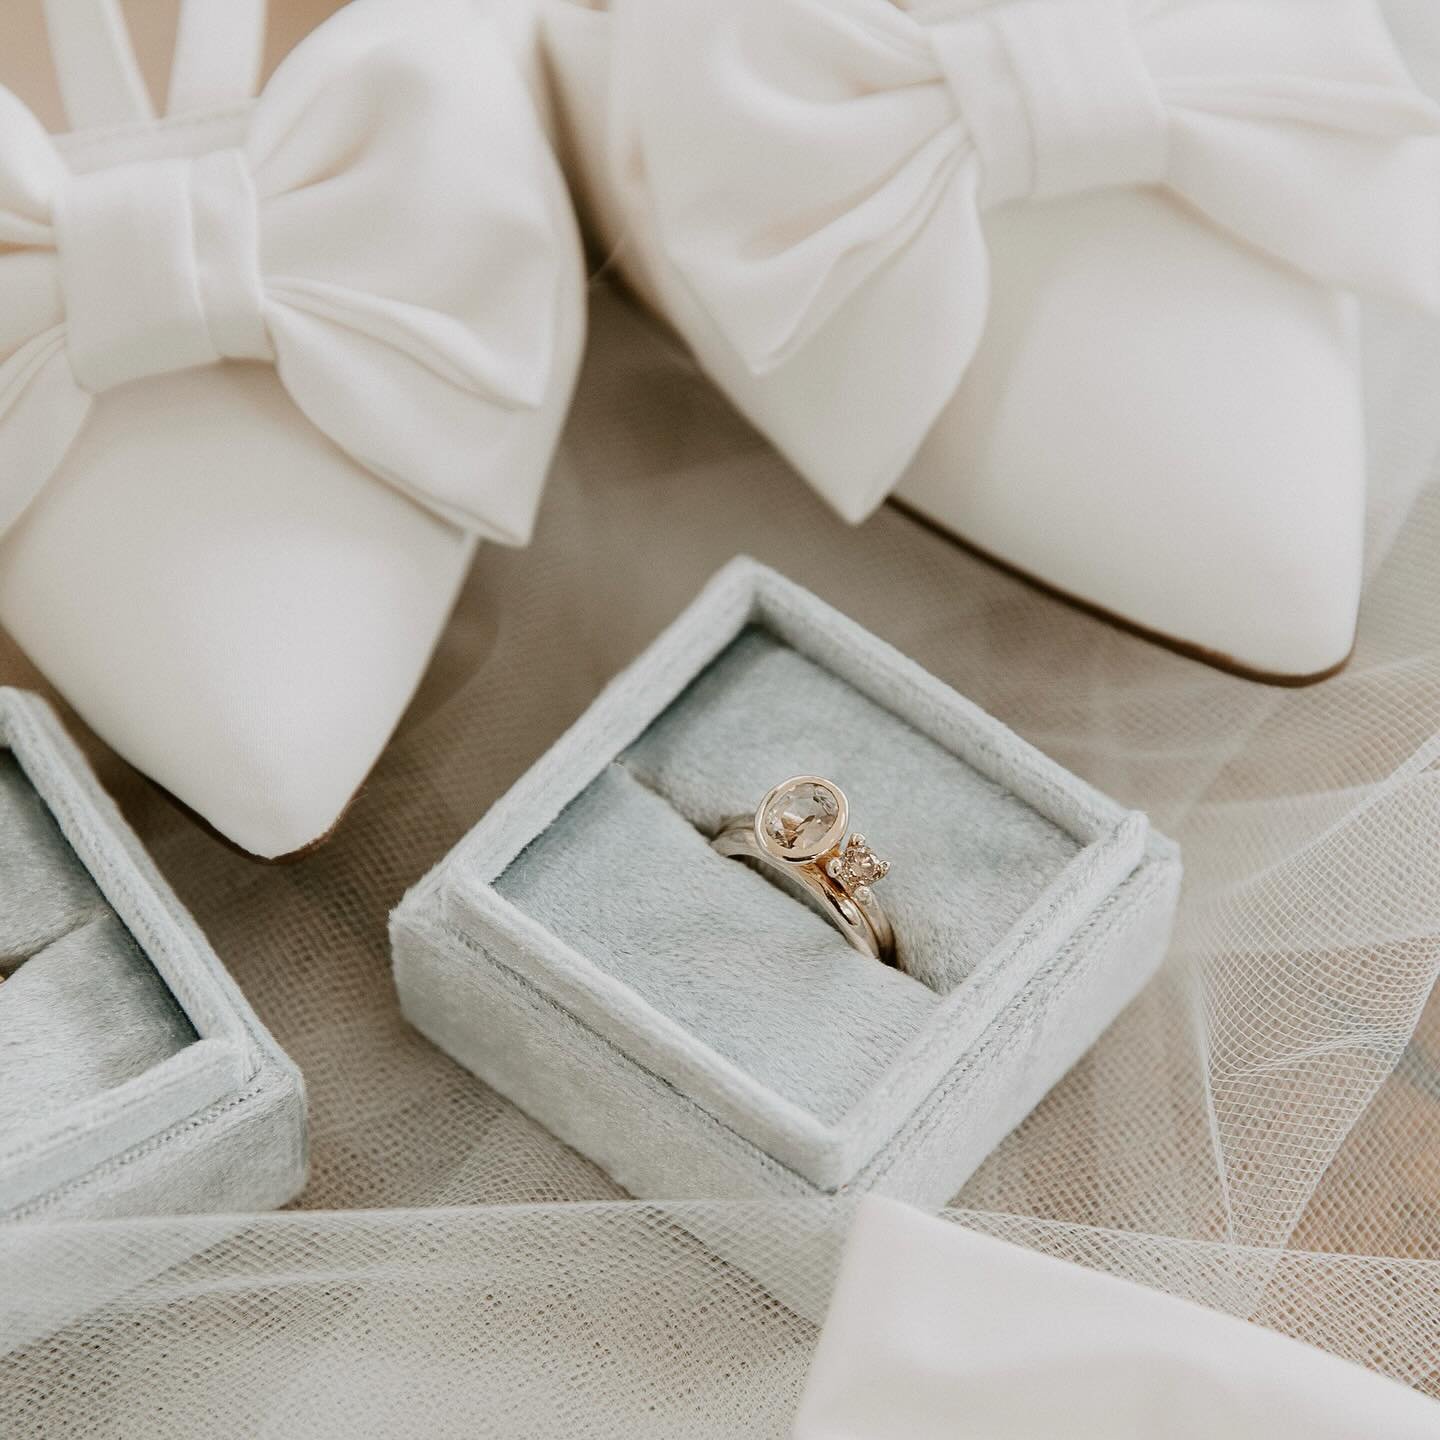 Some stunning detail shots of our wedding rings, taken by the talented Maddi @__lovedup 

My engagement and wedding rings were in solid 14 carat gold, whilst Giulio&rsquo;s wedding band was solid 18 carat. There is no right and wrong when it comes to